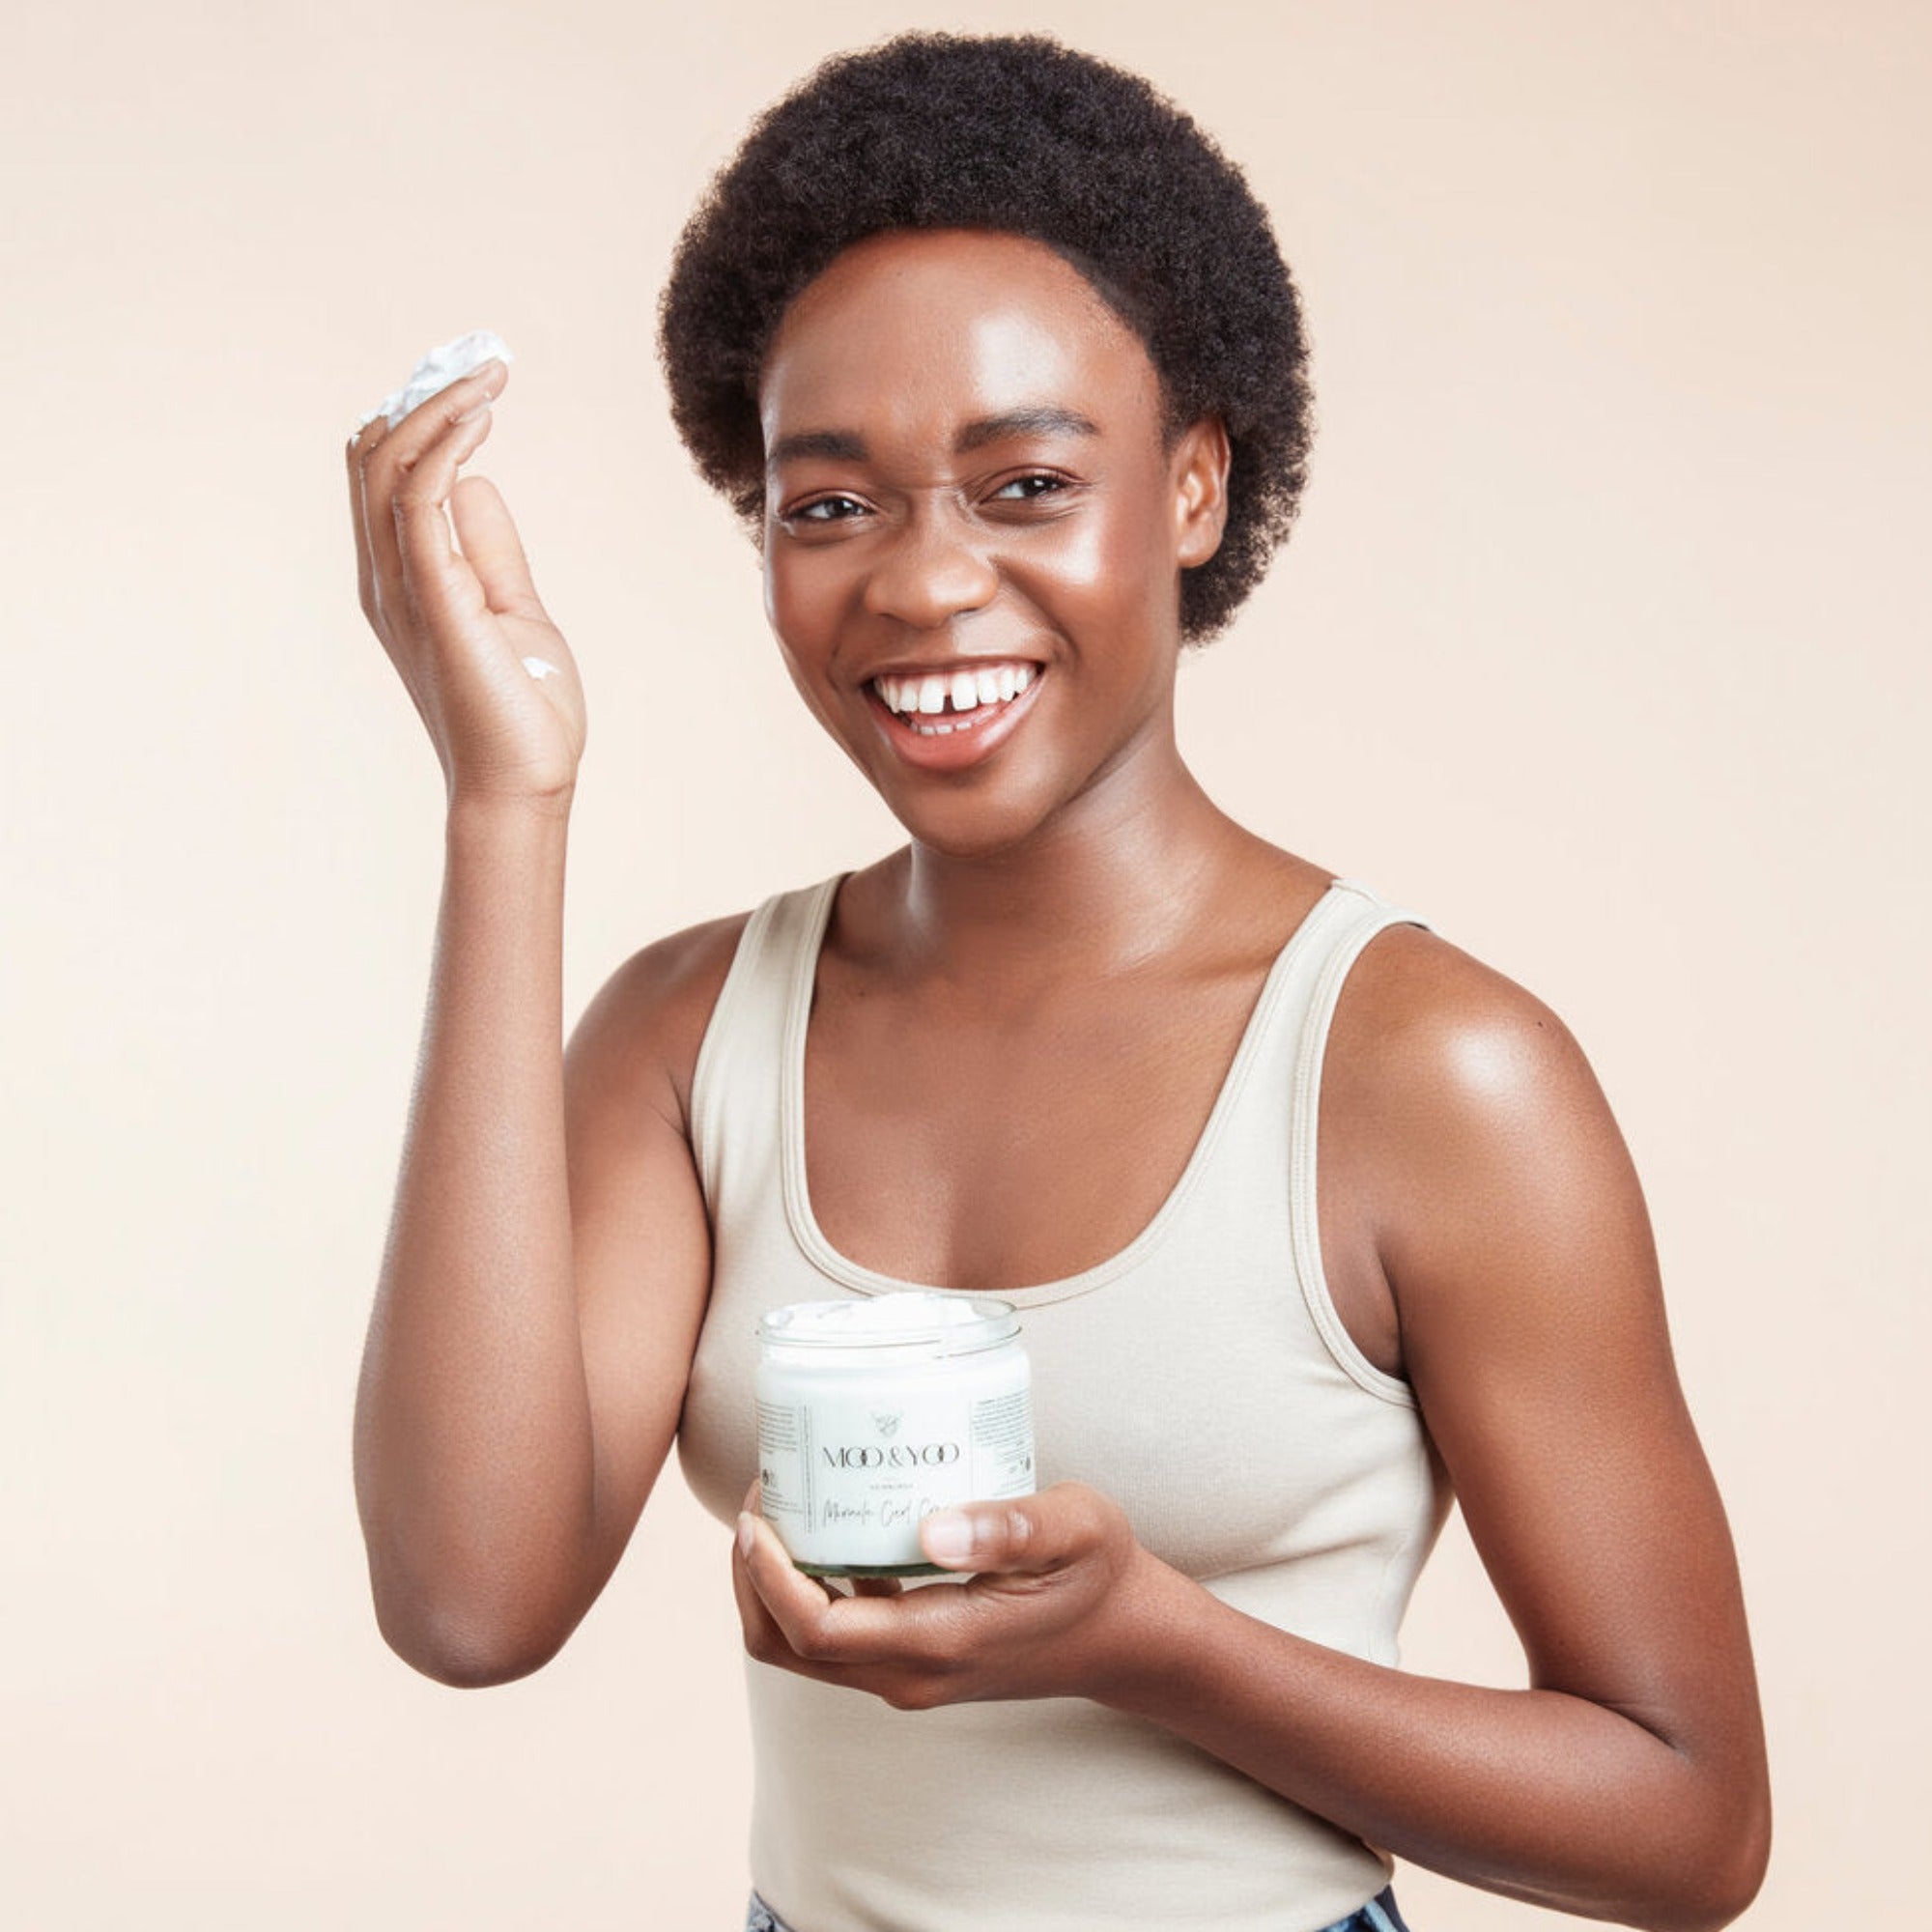 Smiling female model laughing holding Moo and Yoo Miracle Curl Cream in one hand with a scoop of the product in her other hand held up to her hair. She has black textured natural hair and is wearing a neutral coloured vest top.